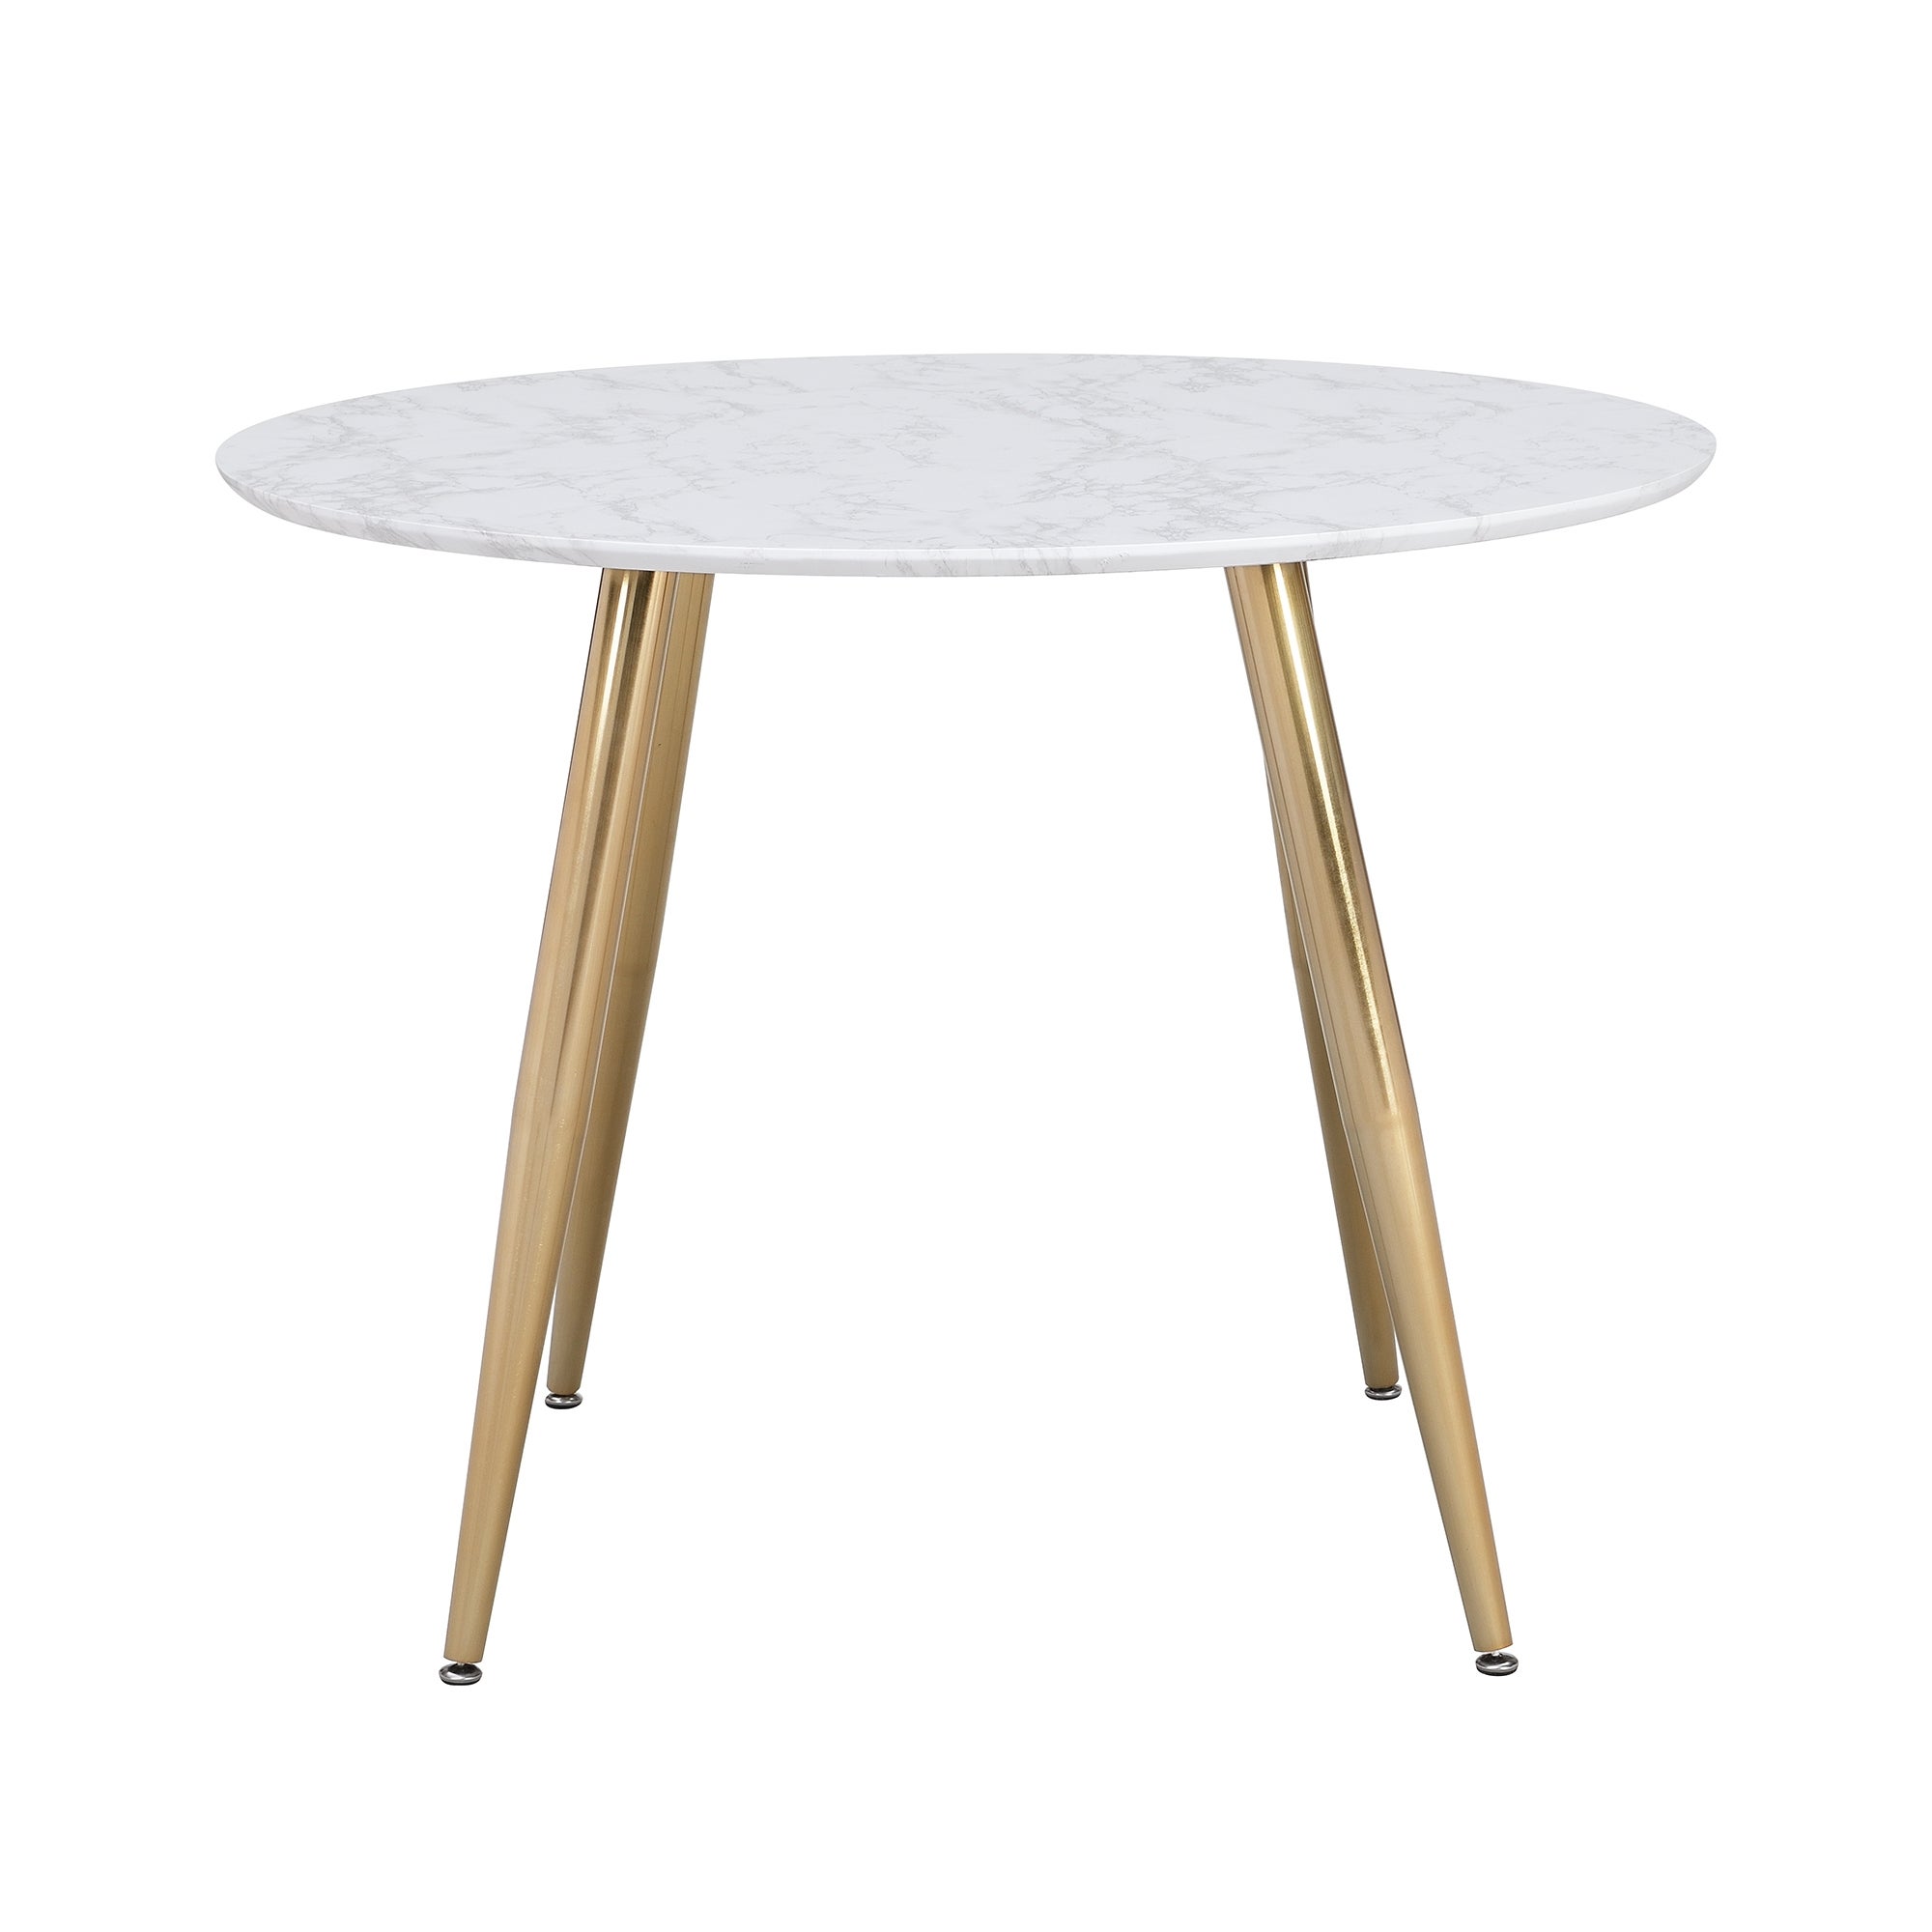 Kendall 4 Seater Round Dining Table Marble Effect White